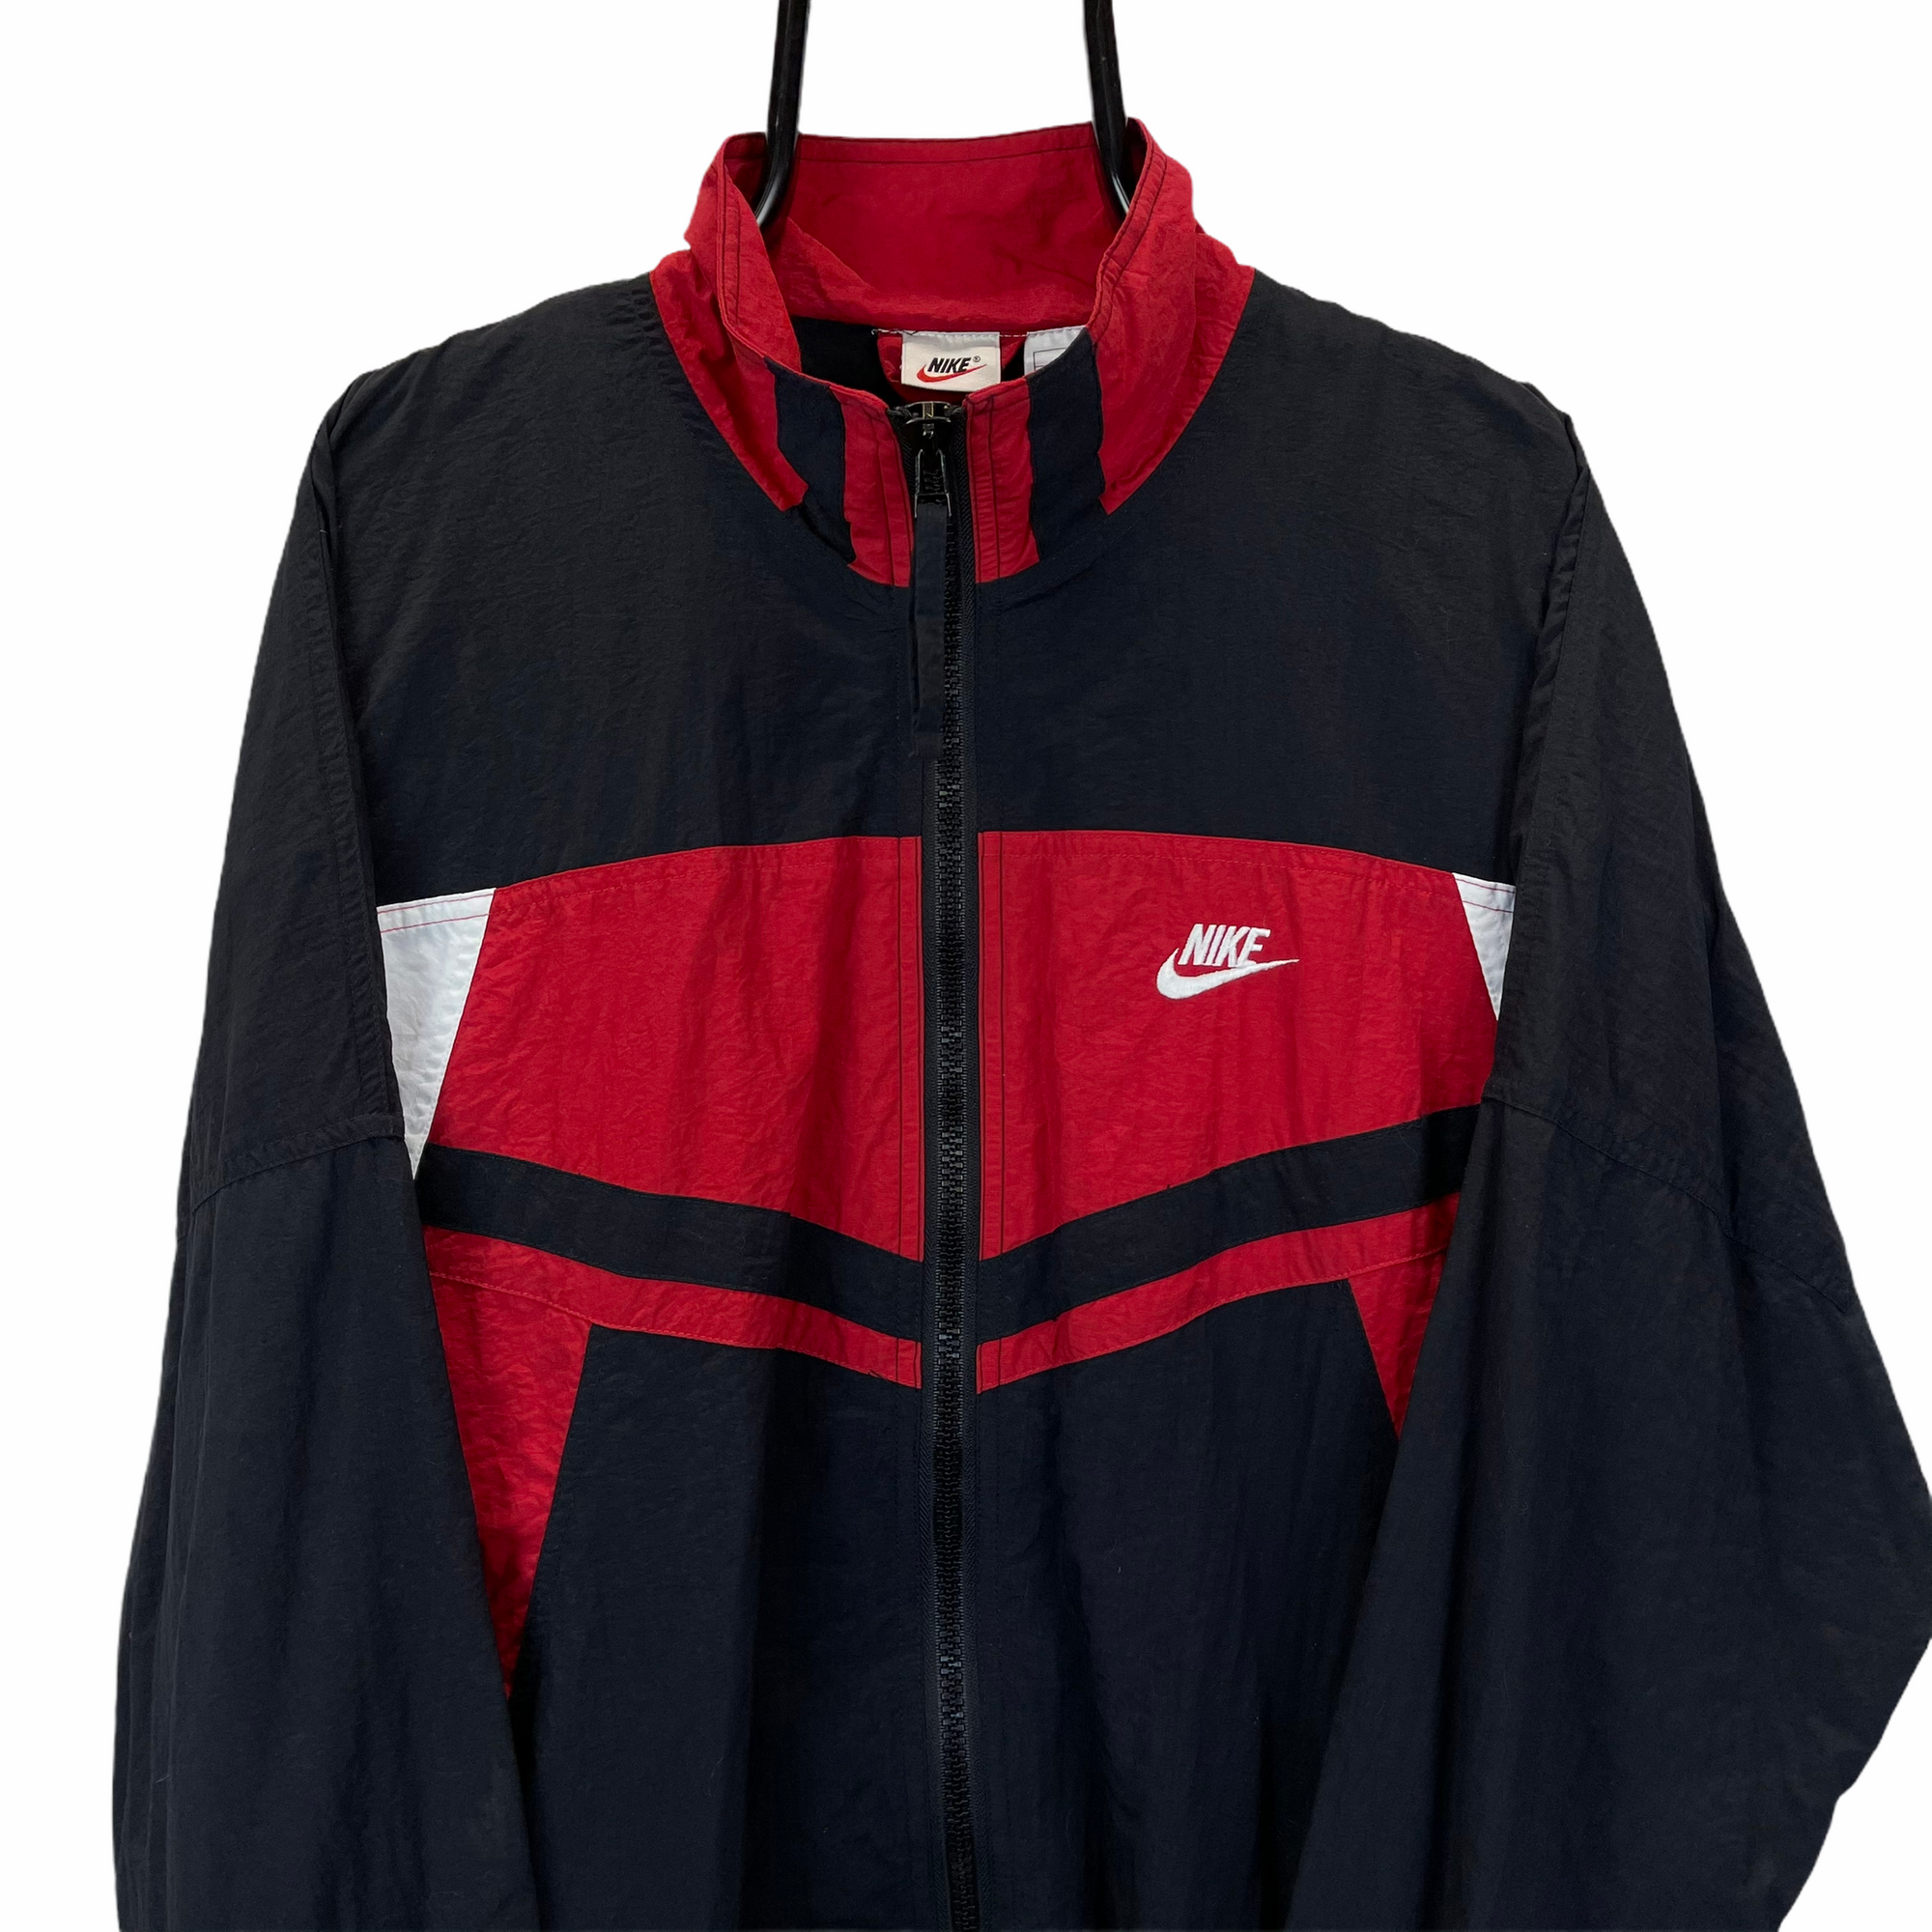 VINTAGE 90S NIKE EMBROIDERED BIG SWOOSH TRACK JACKET IN BLACK, RED & WHITE - MEN'S XL/WOMEN'S XXL